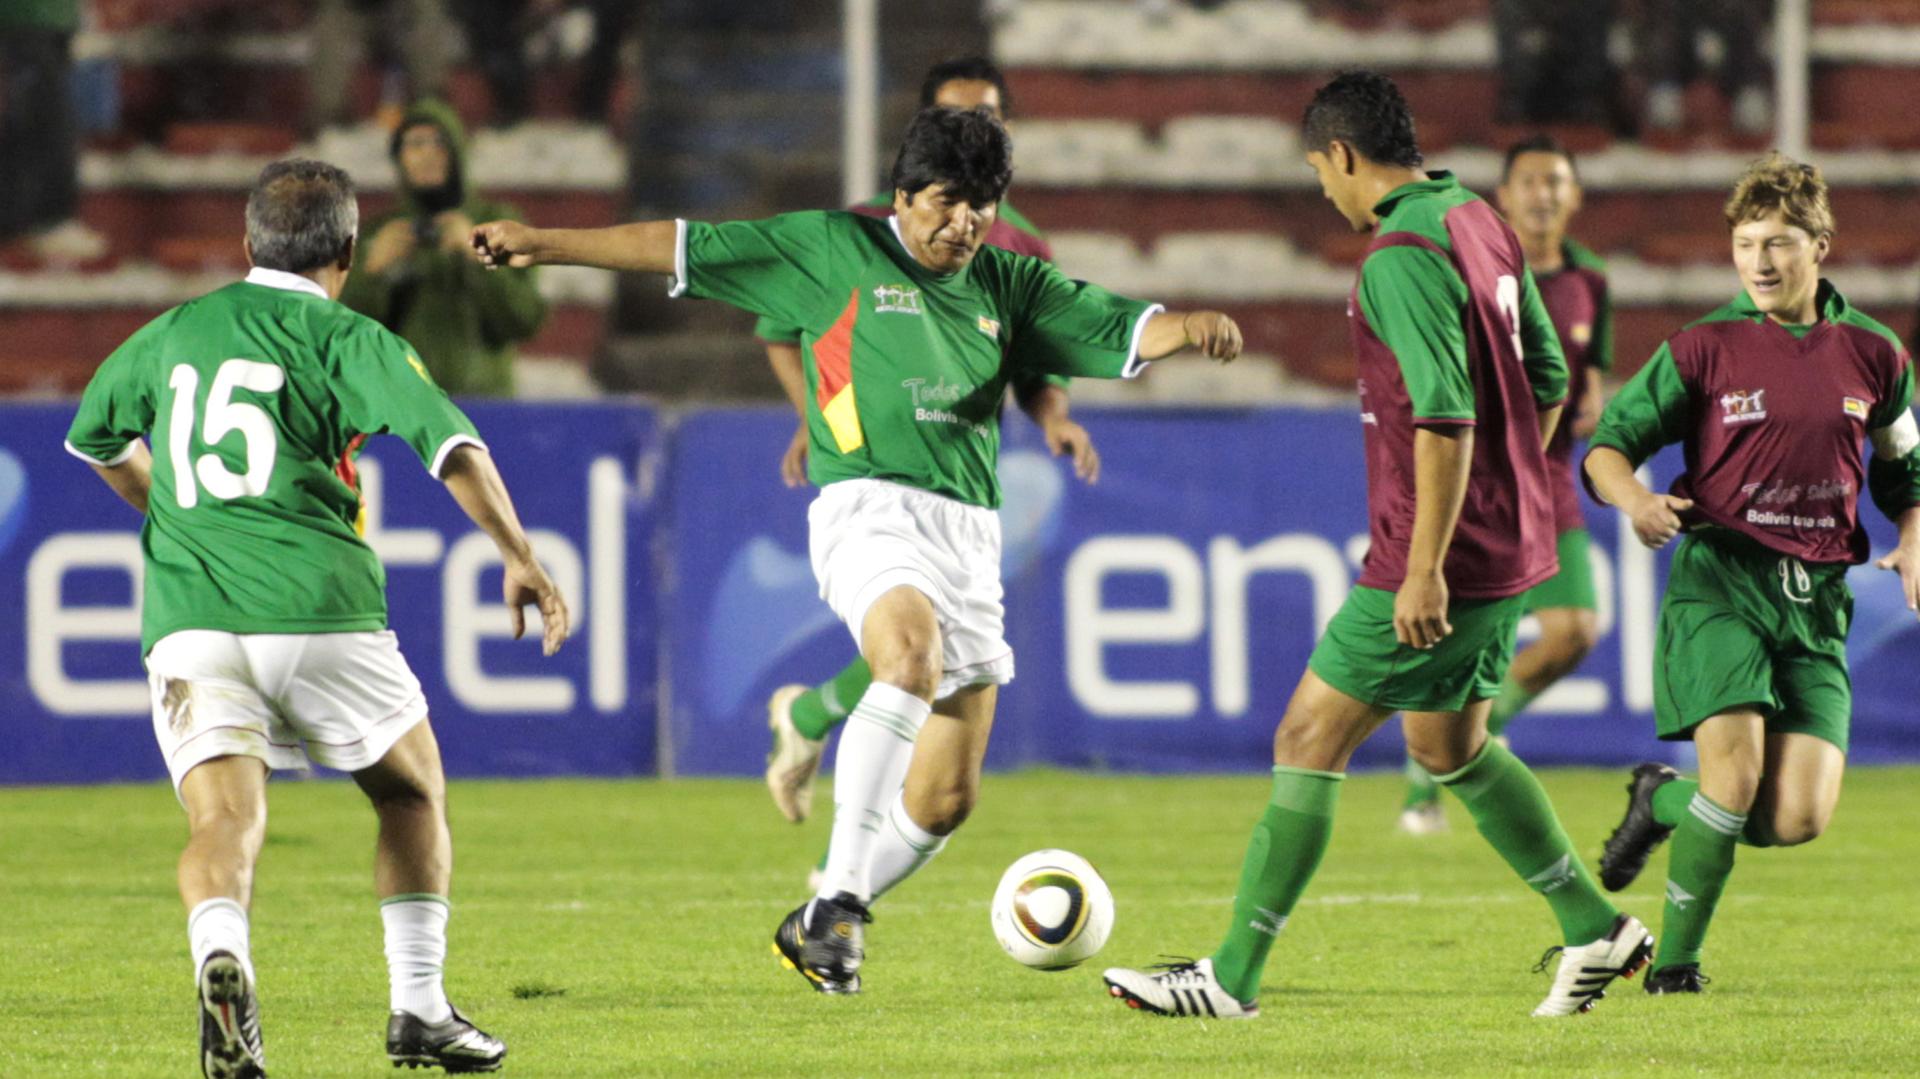 President Evo Morales of Bolivia playing in a friendly match in La Paz in 2011